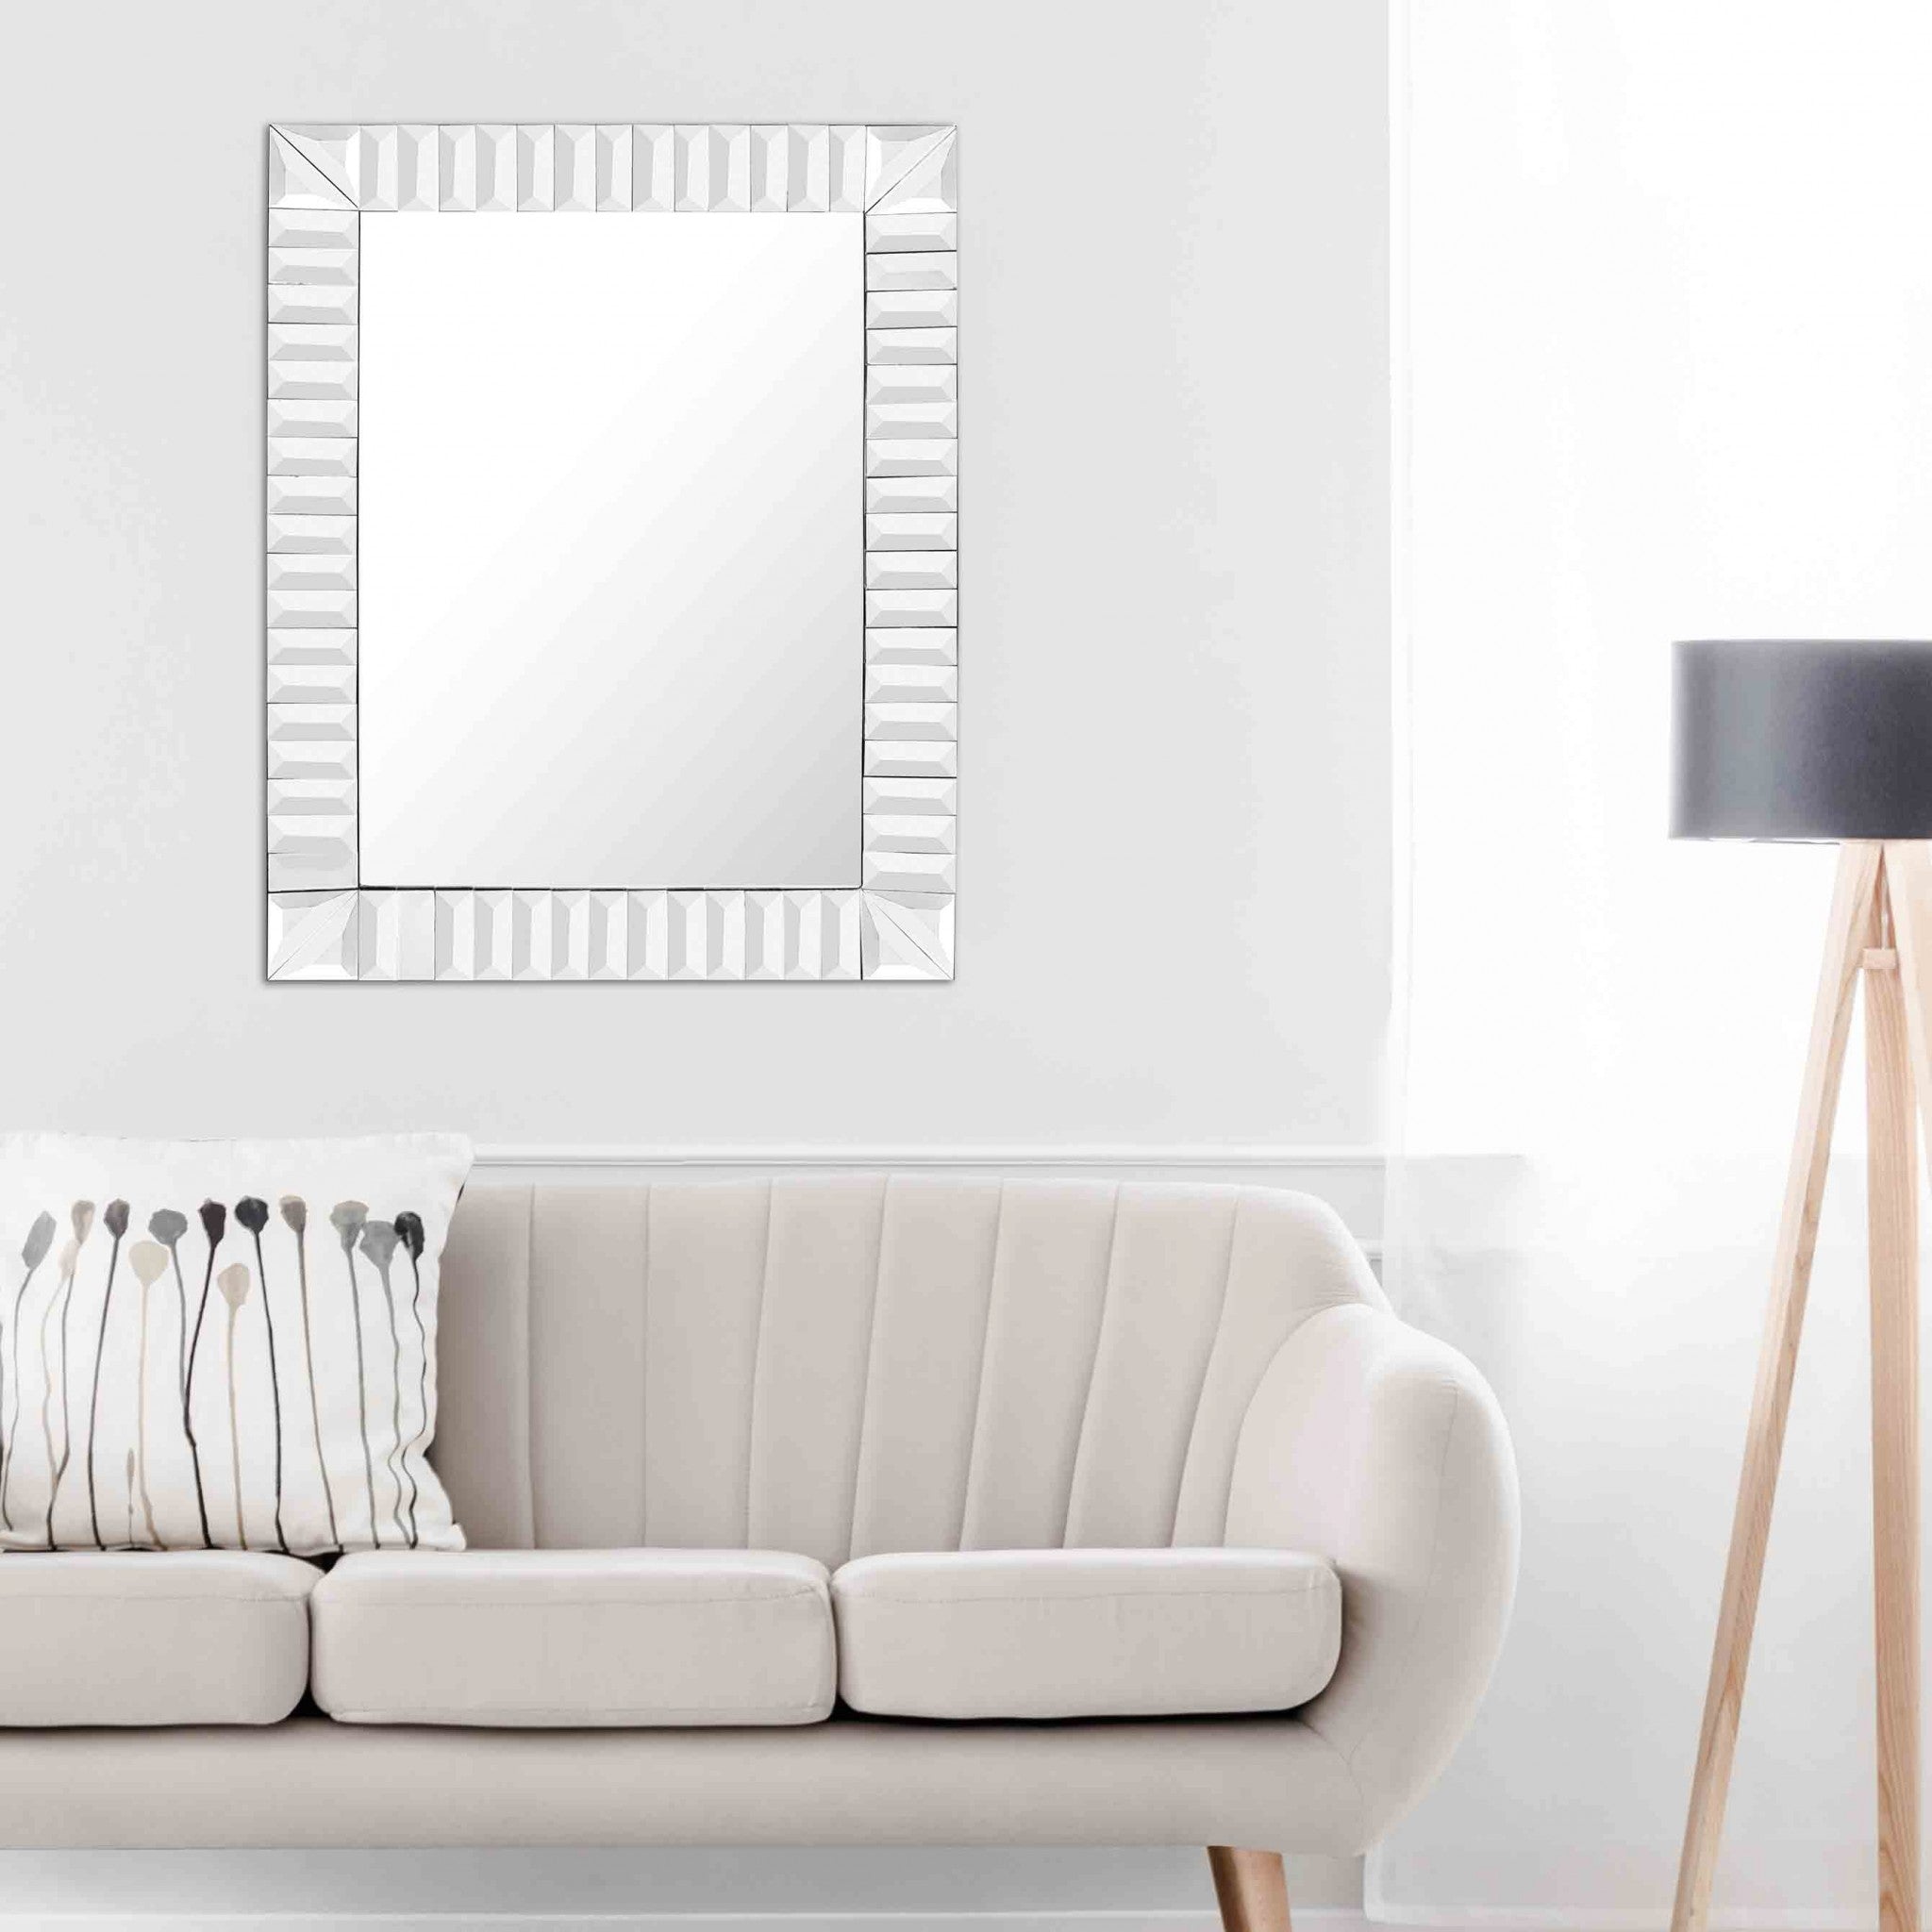 Clear Rectangle Chiseled Accent Glass Wall Mirror | 29.5